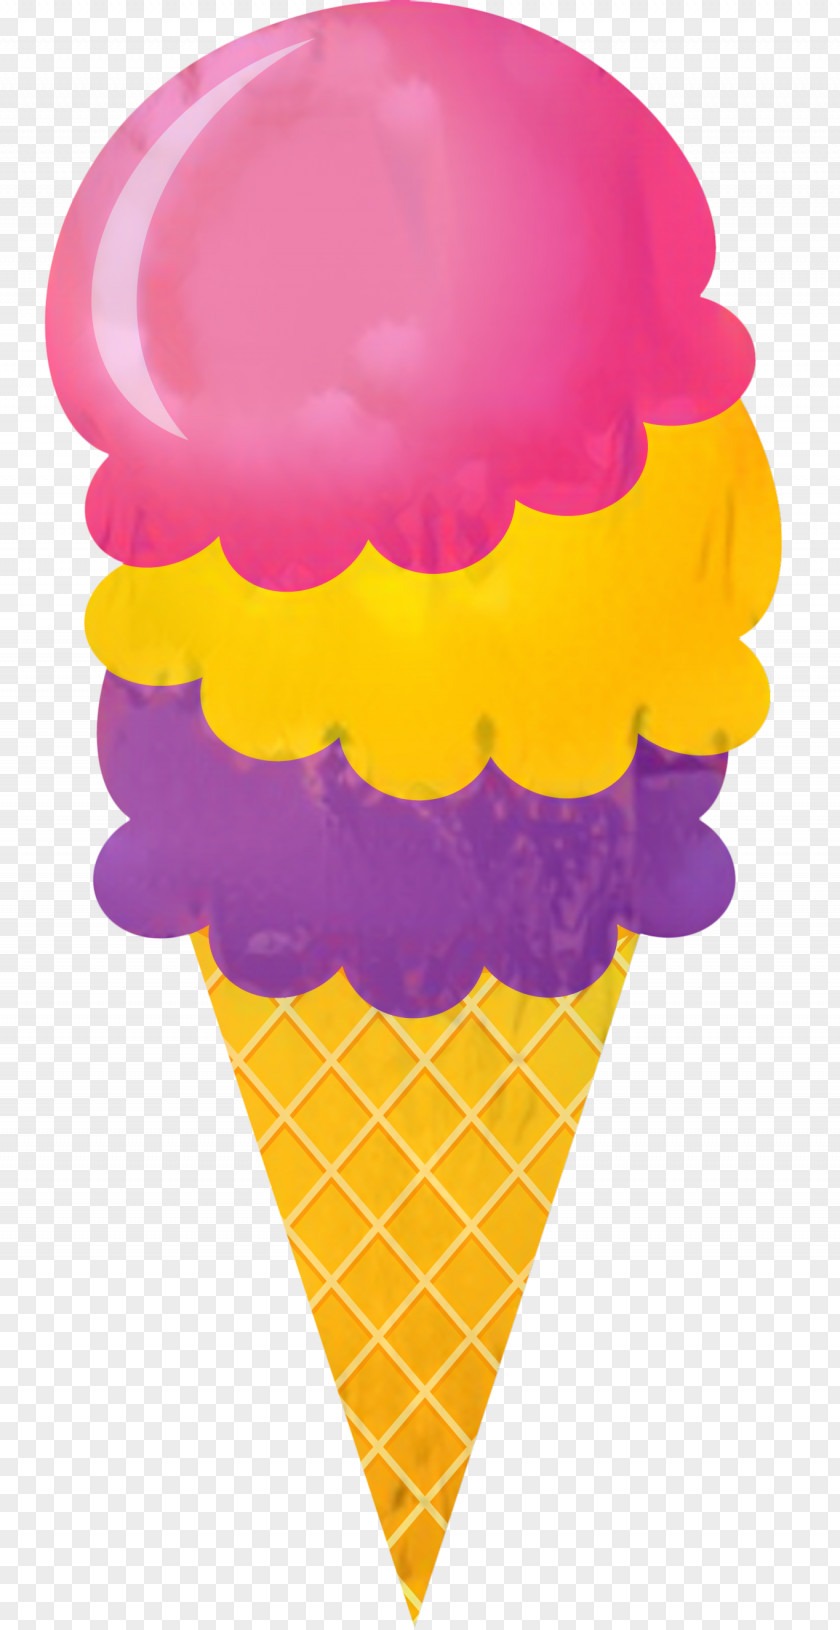 American Food Ice Pop Cream Cone Background PNG